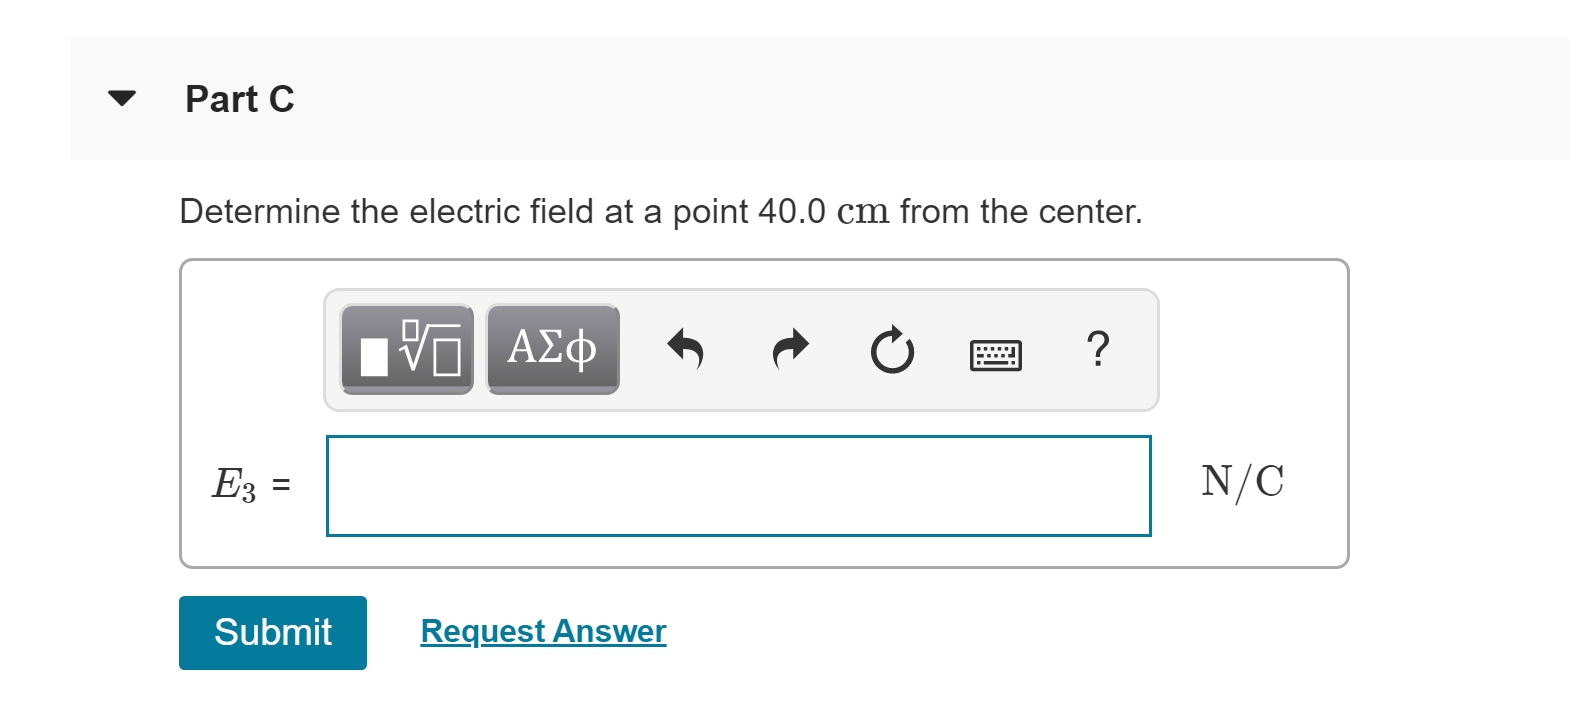 Part C
Determine the electric field at a point 40.0 cm from the center.
VA
N/C
E3
Submit
Request Answer
